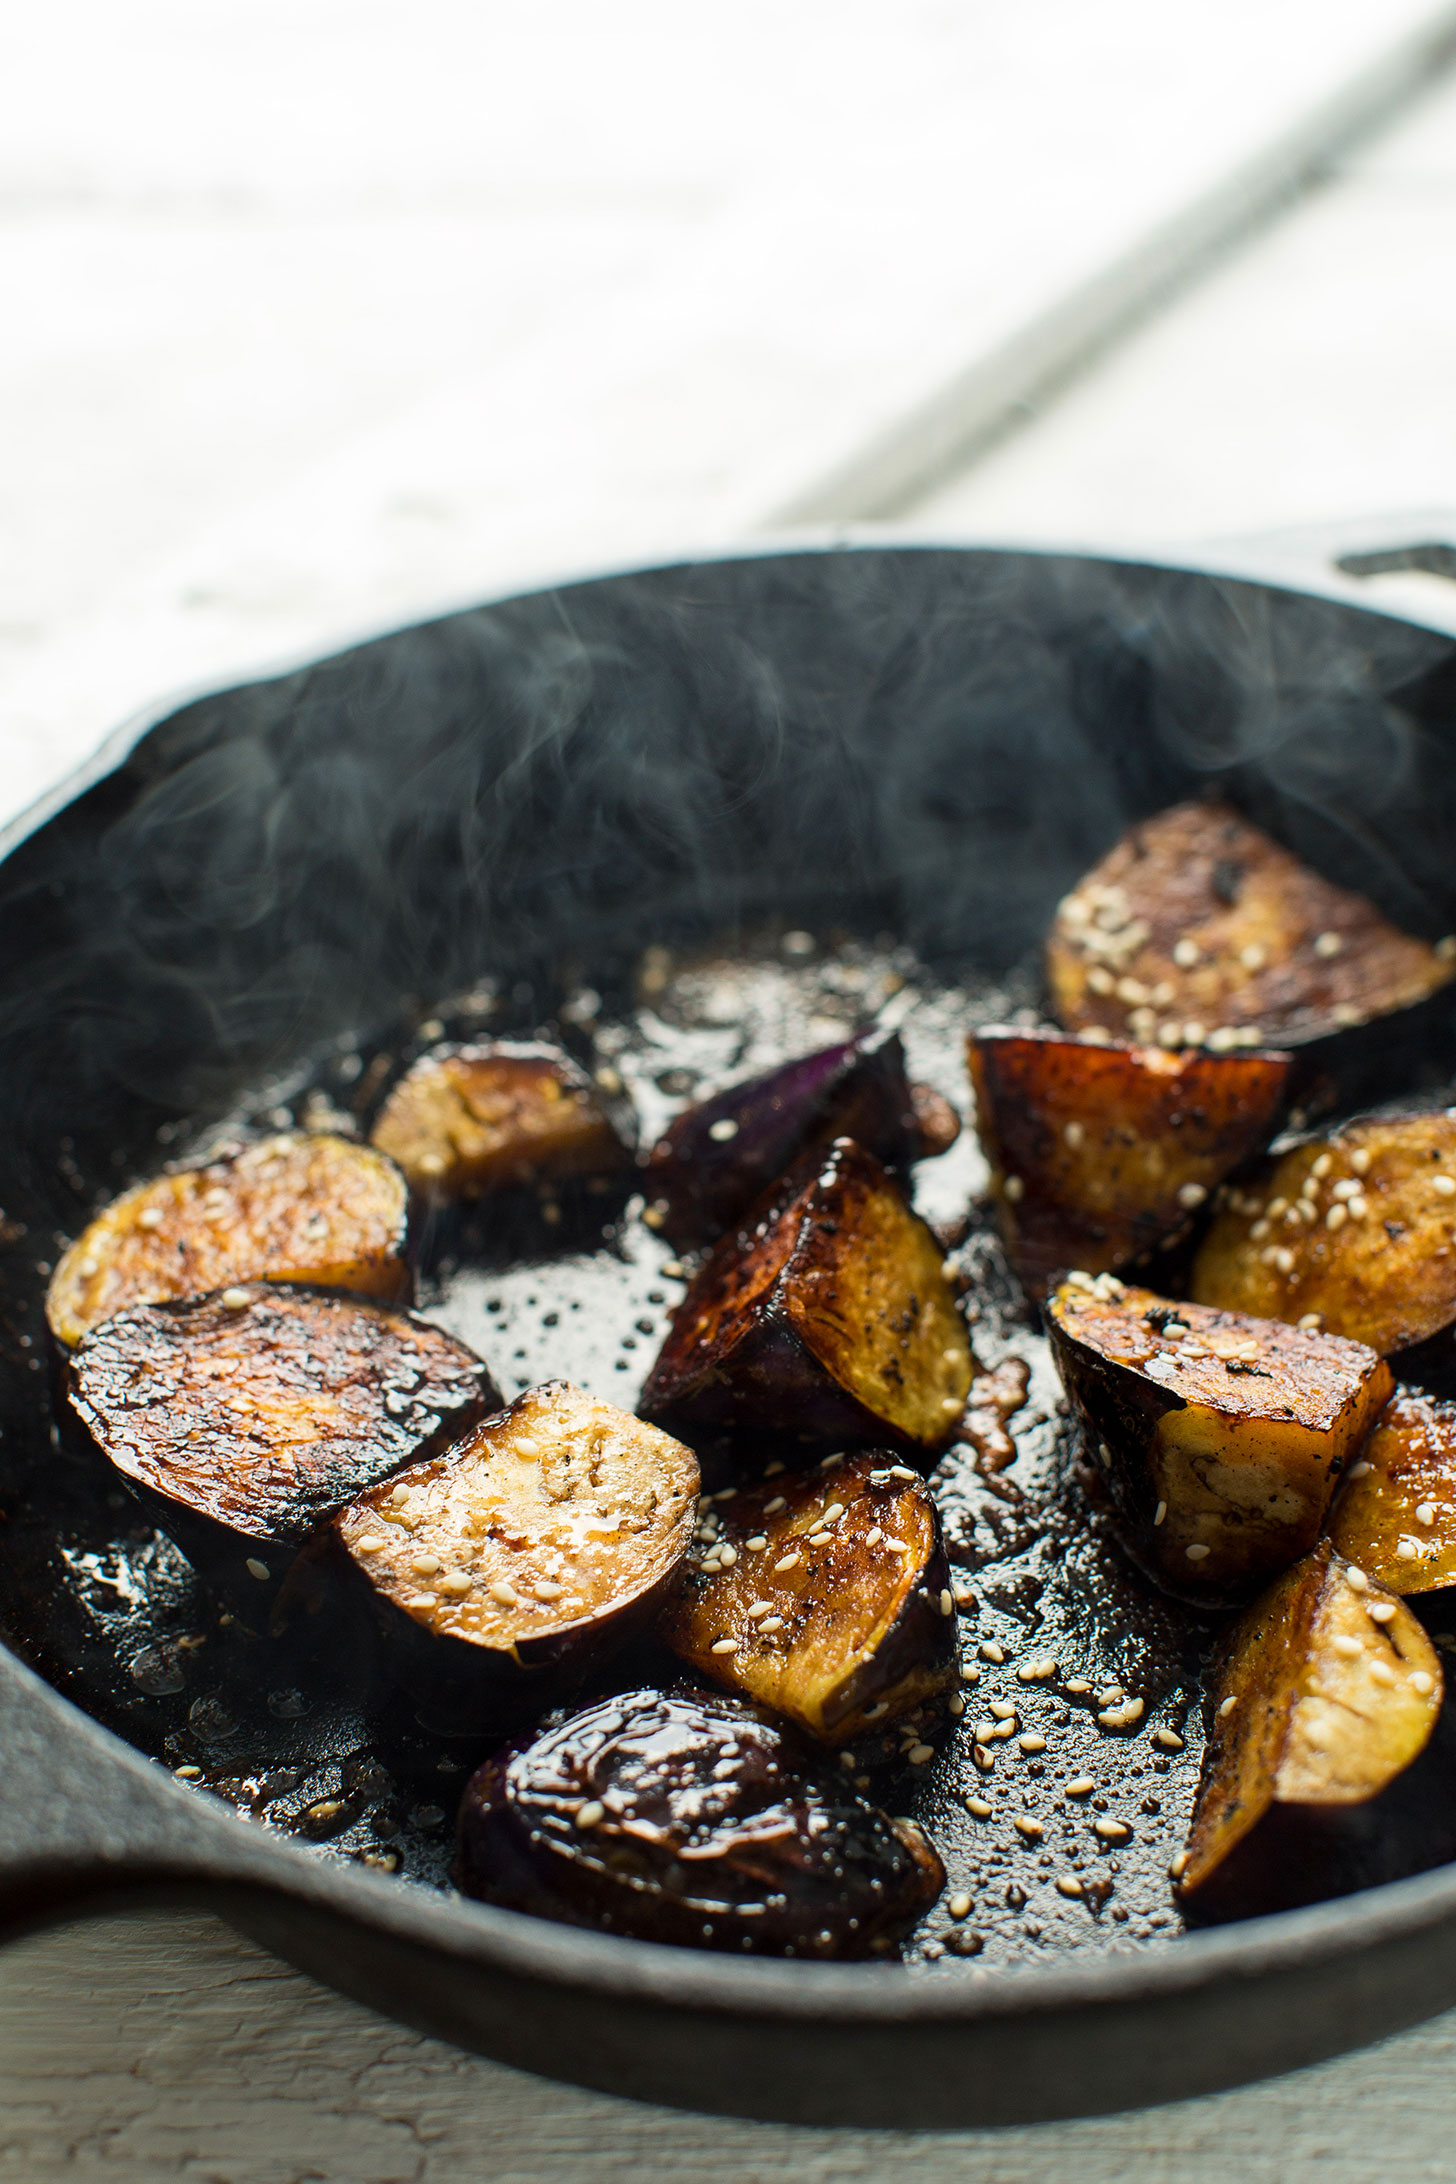 Cooking eggplant in a cast-iron skillet for a delicious gluten-free vegan meal